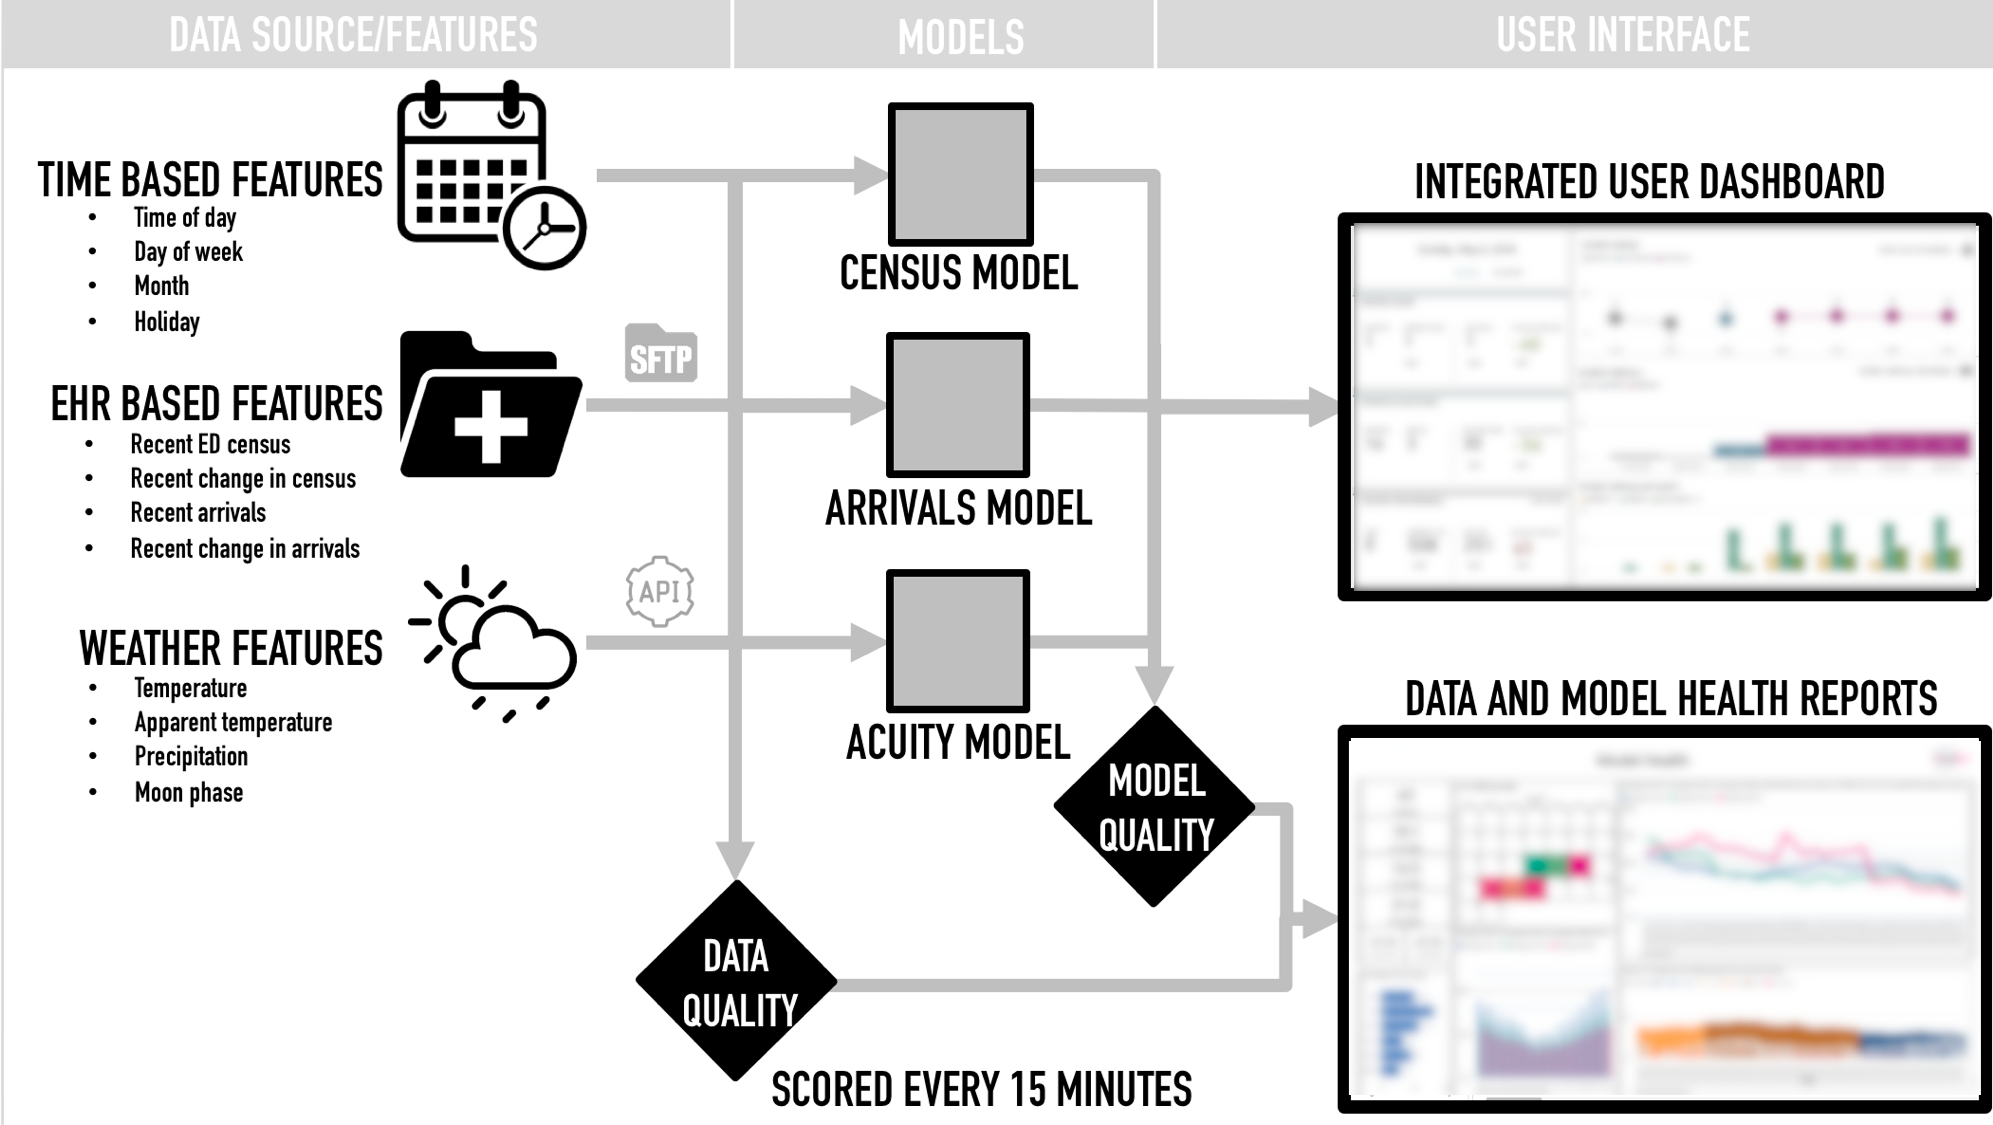 Schematic showing the data sources, models, and resulting User and
Model Health Dashboards. The actual dashboard image is hidden due to
privacy and data compliance.